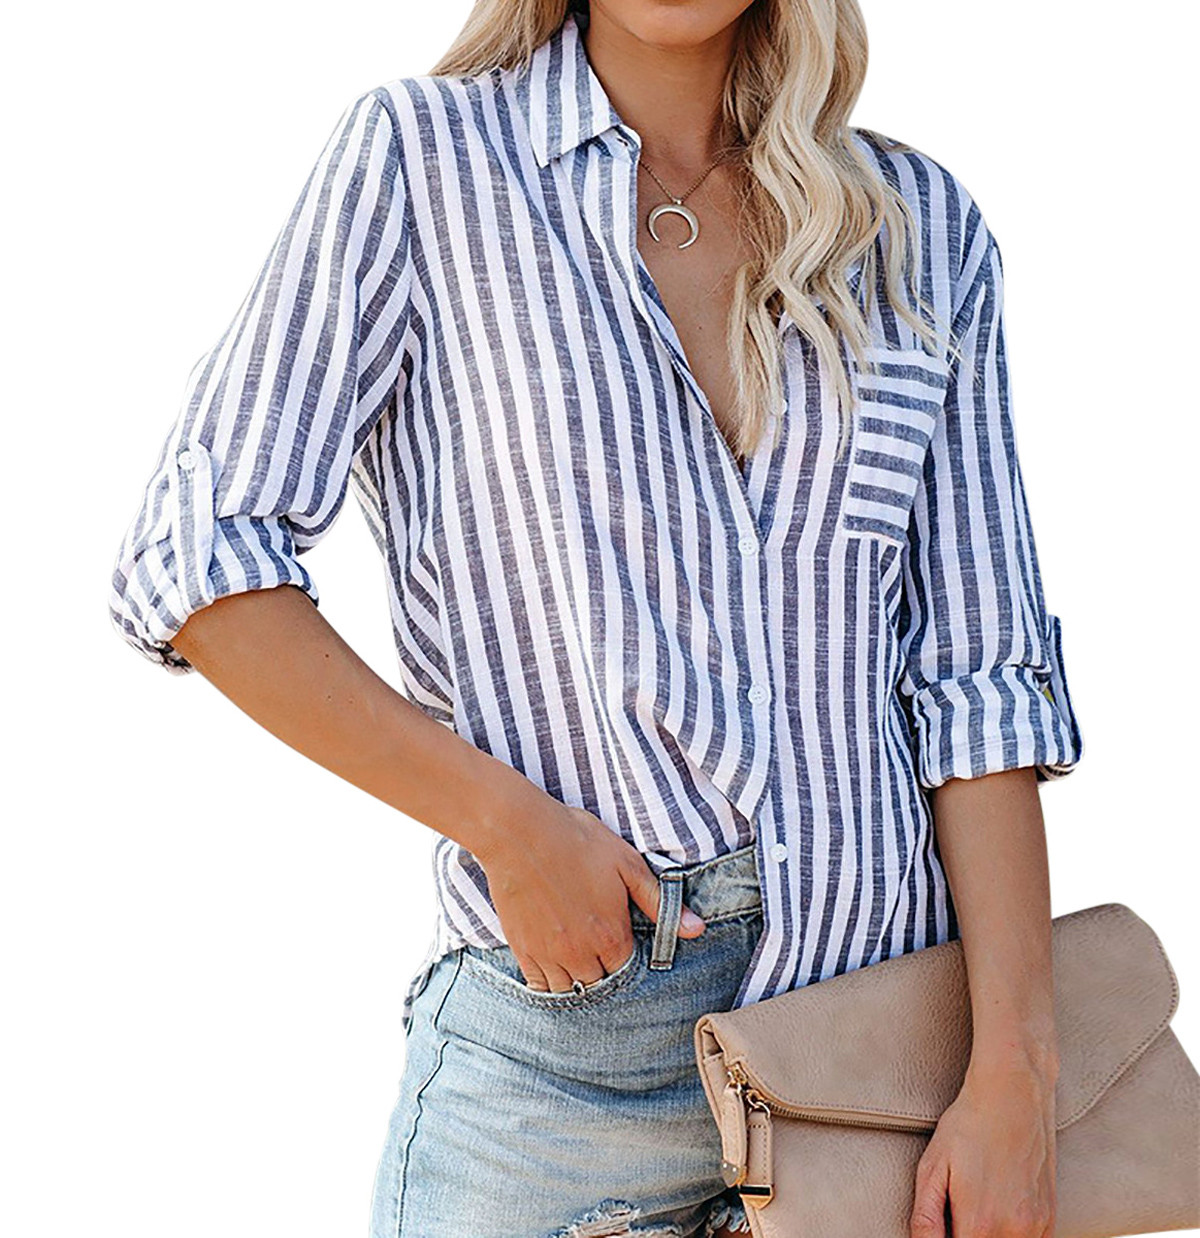 US$ 17.99 - R.Vivimos Women's Fall Cotton Long Sleeves Roll Up Striped ...